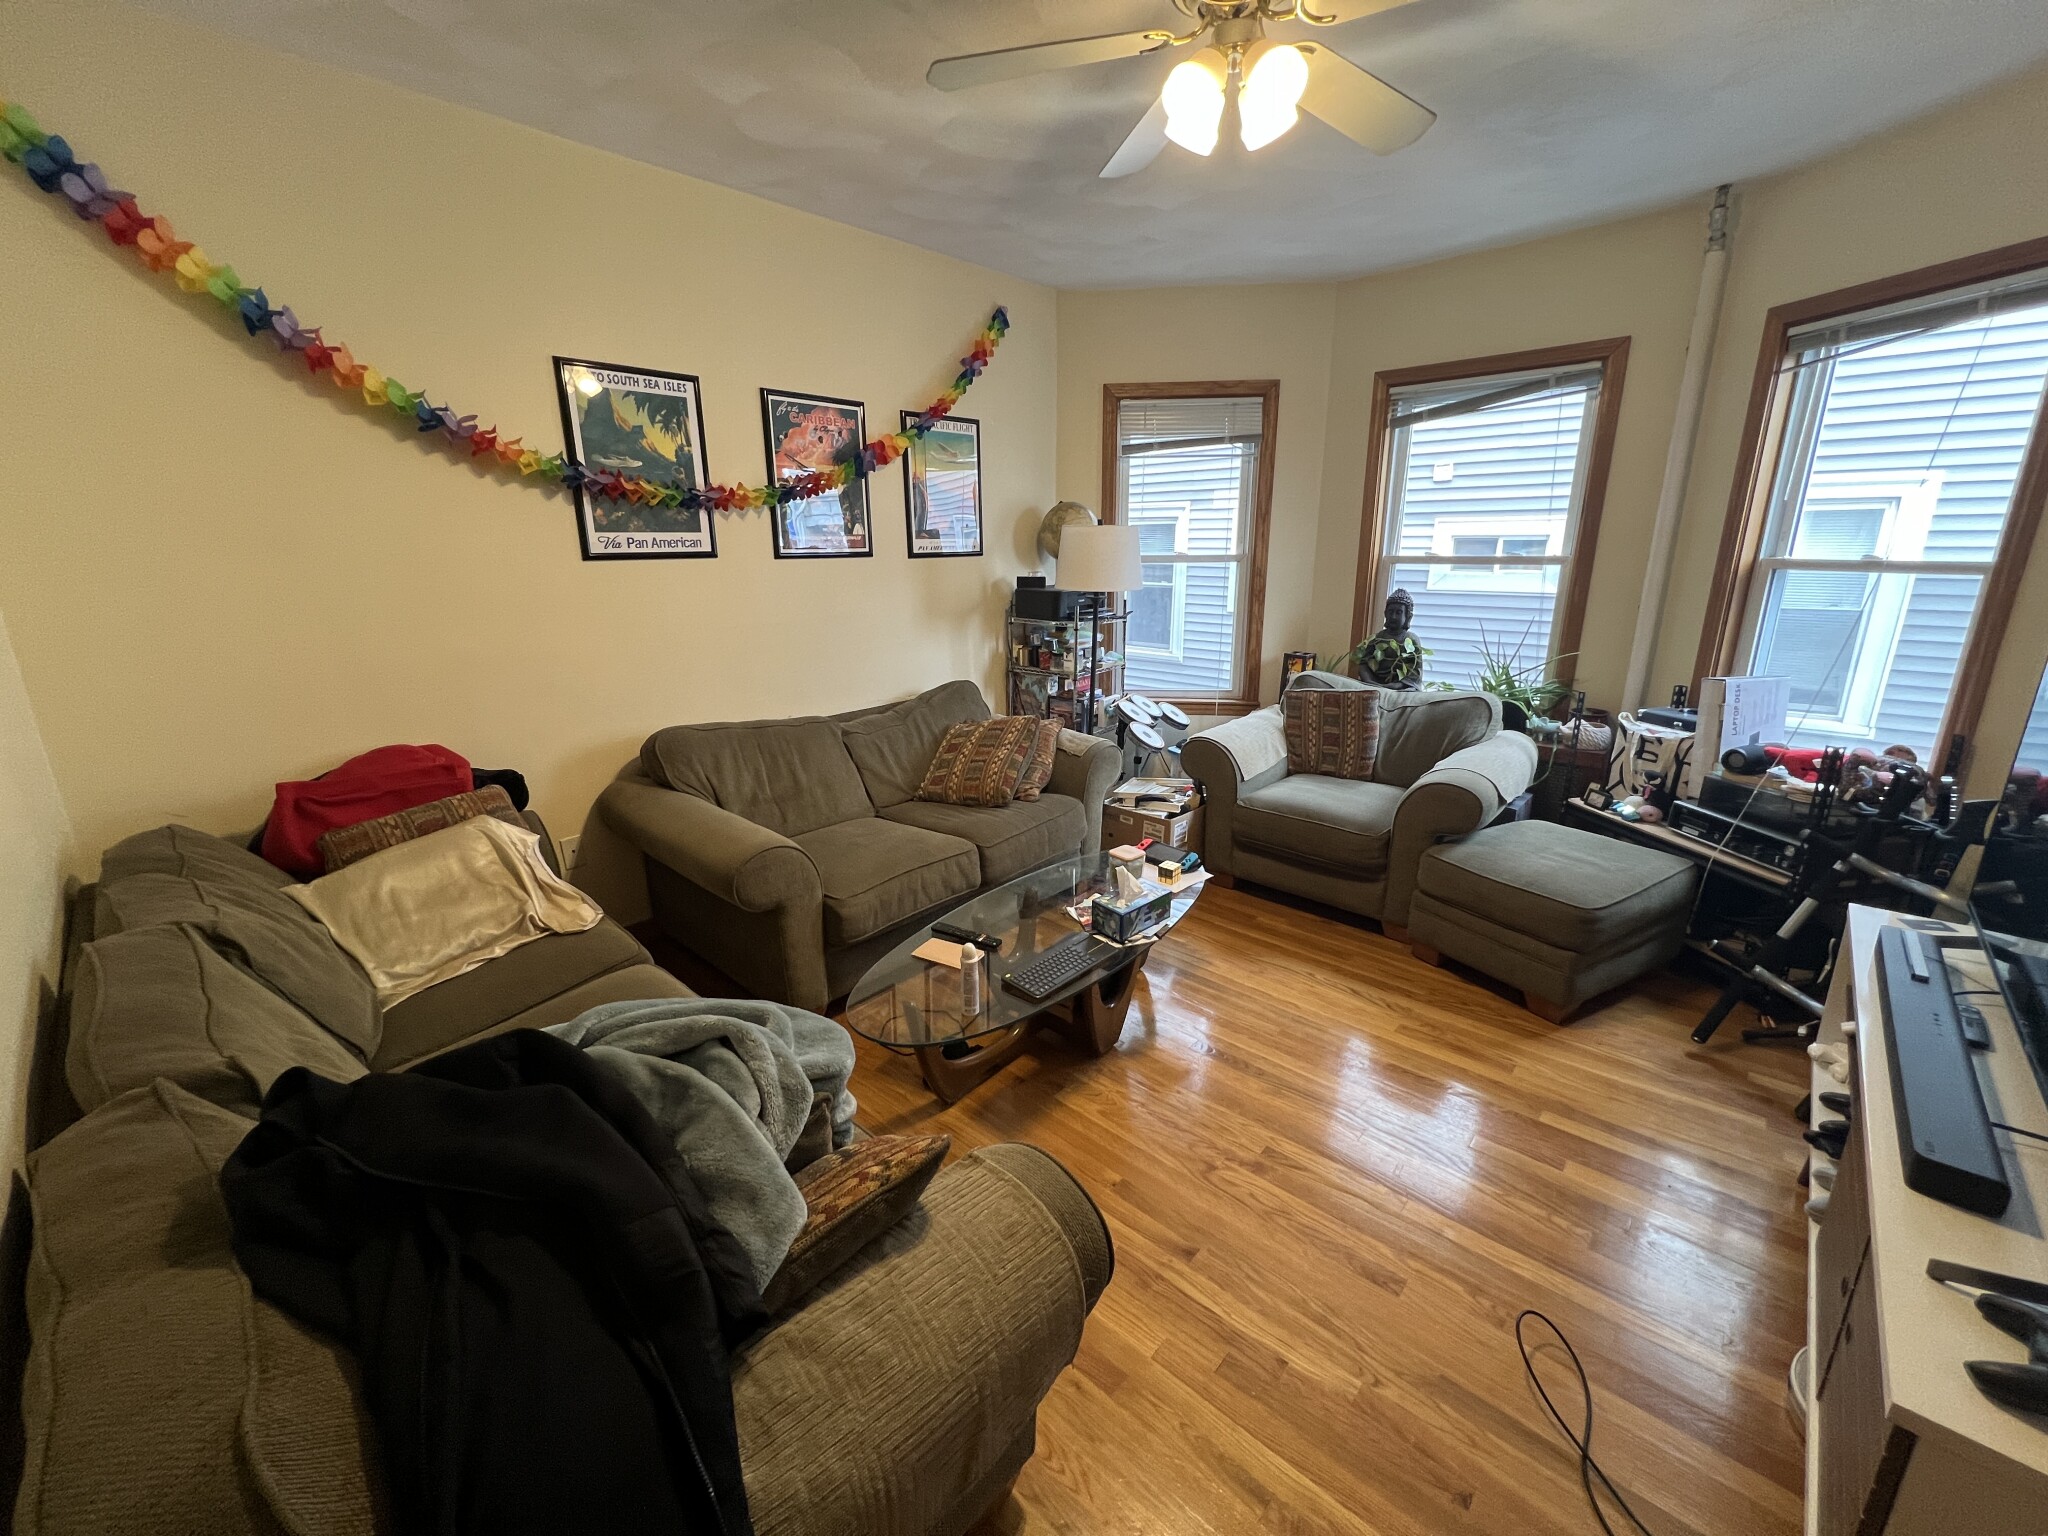 Photos of apartment on Hall Ave.,Somerville MA 02144